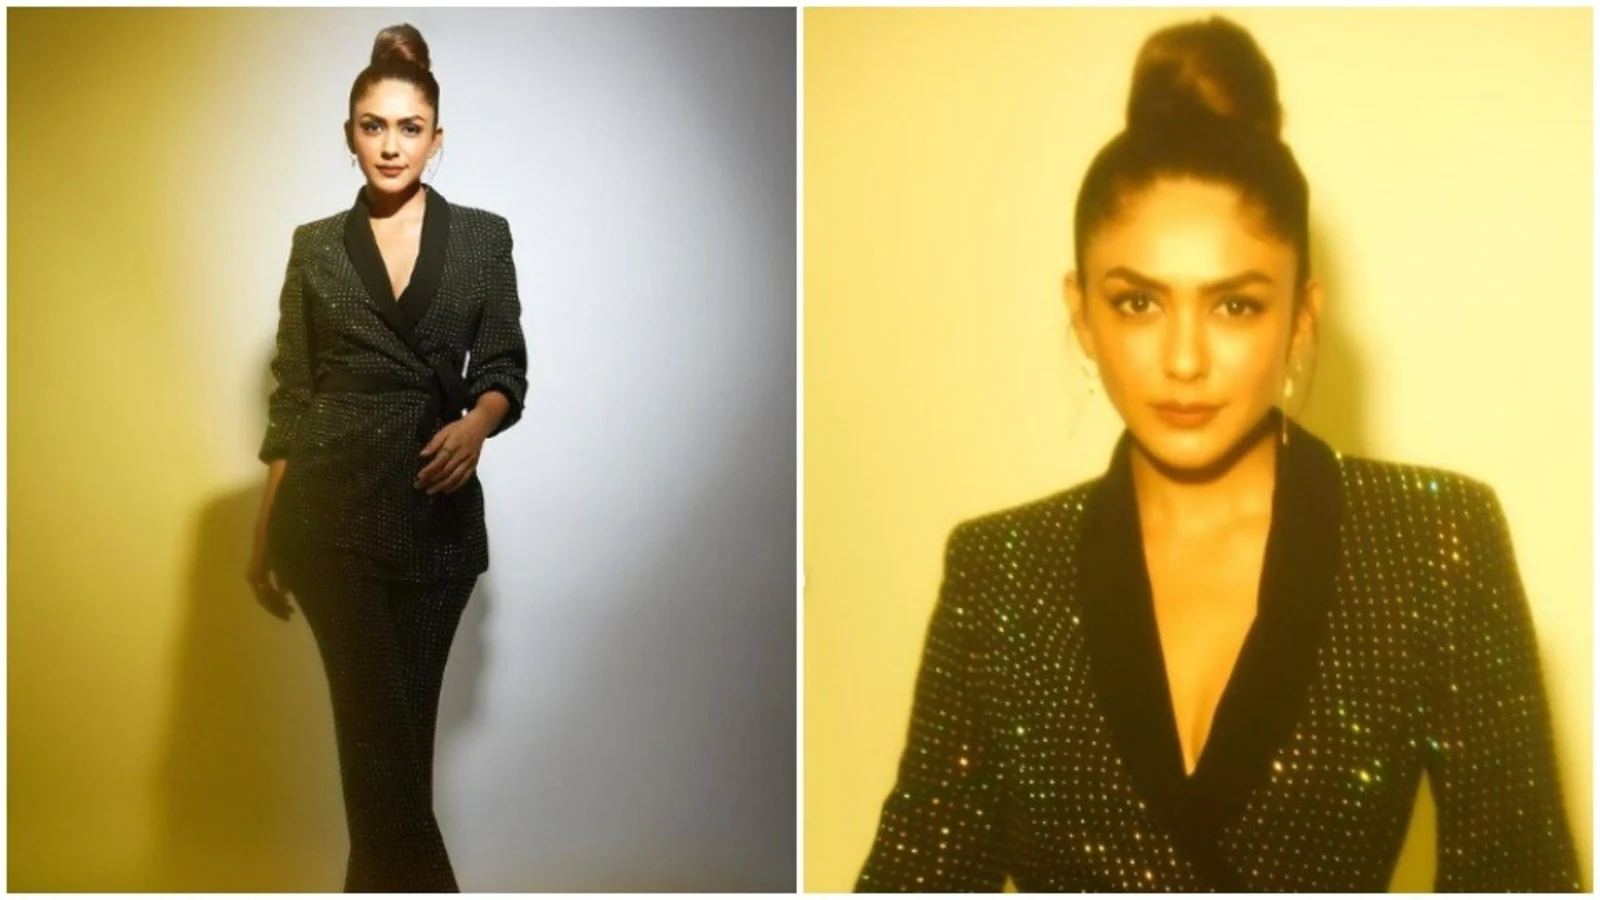 Mrunal Thakur, in a sequined co-ord set, is giving us party vibes